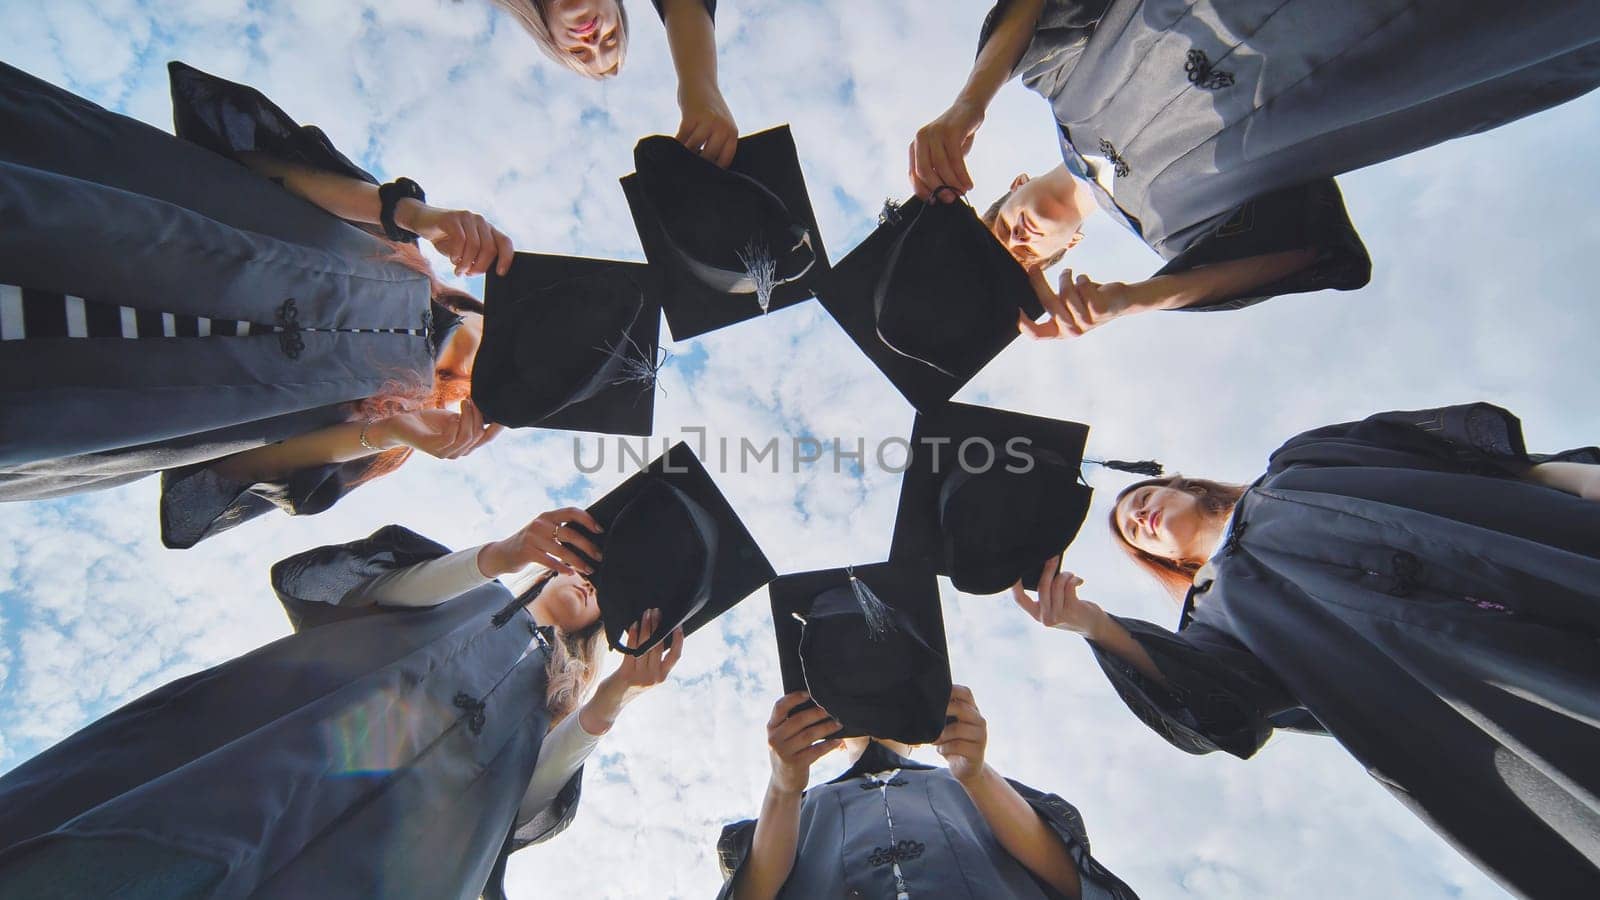 Graduates in black robes join their caps in a circle